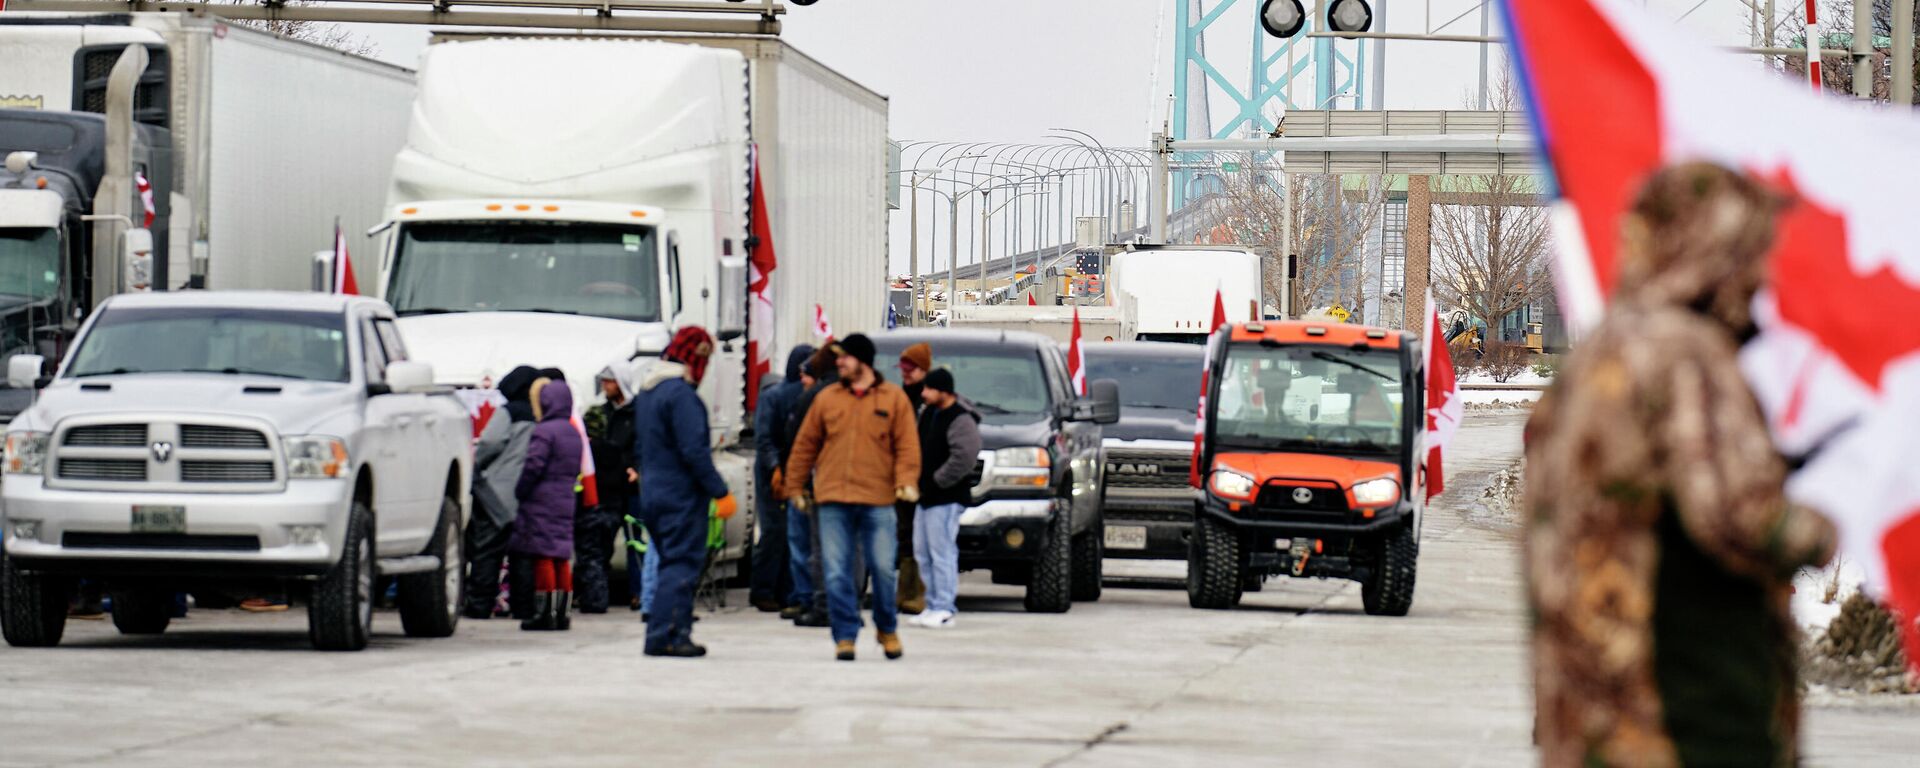 Supporters of the Truckers Convoy against the Covid-19 vaccine mandate block traffic in Canada bound lanes of the Ambassador Bridge border crossing, in Windsor, Ontario, on February 8, 2022. - Sputnik International, 1920, 11.02.2022